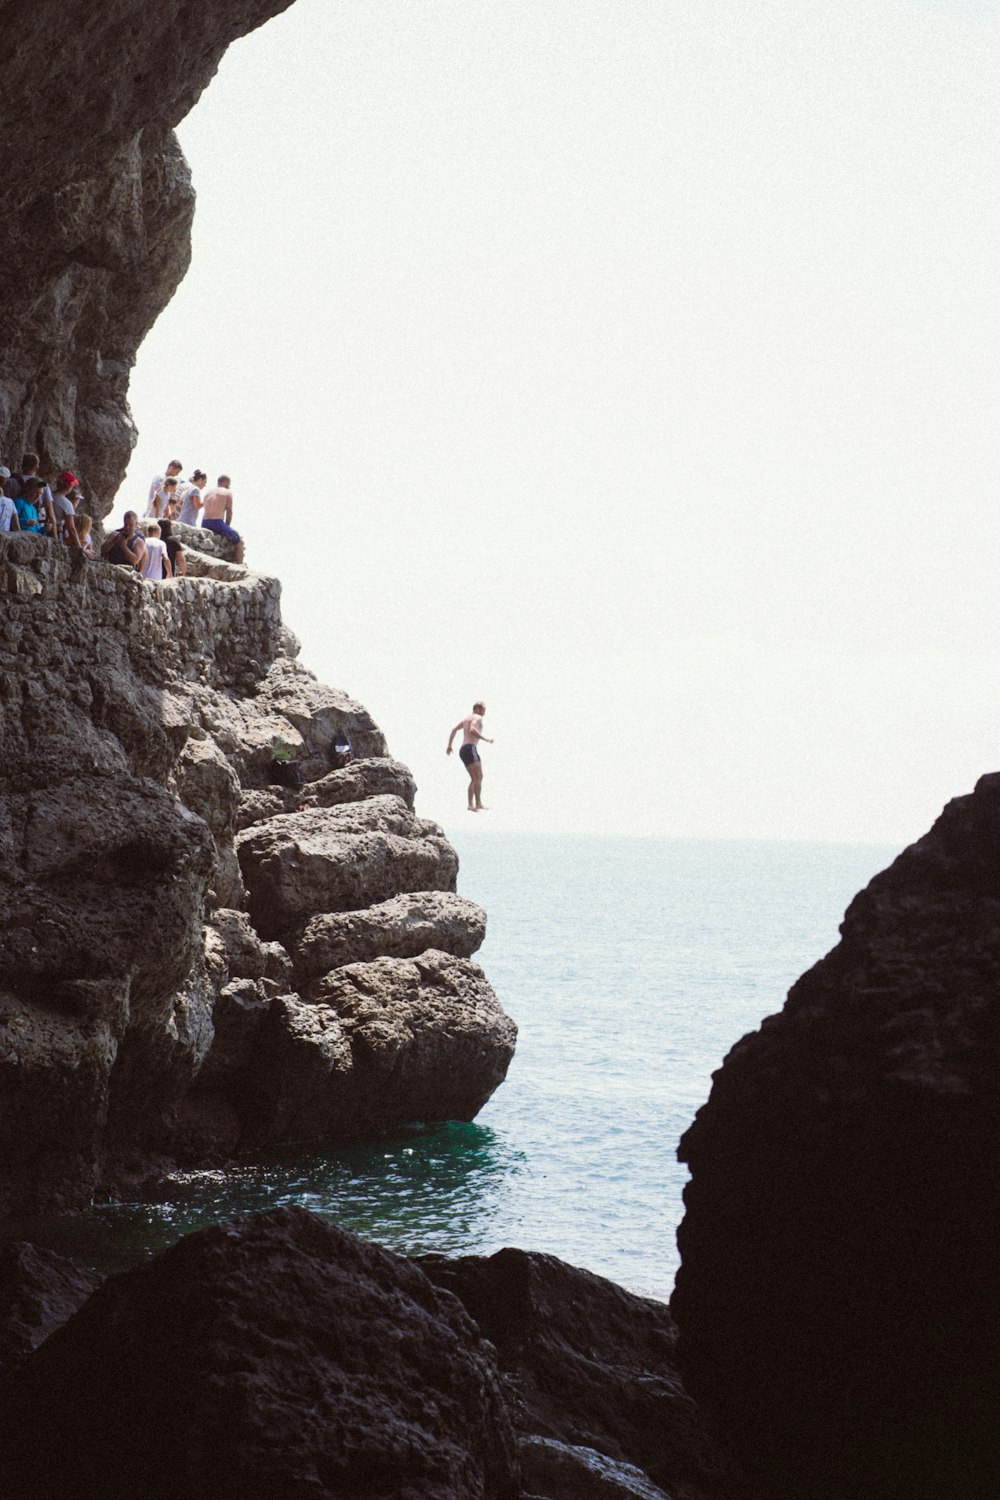 people standing on rock formation near sea during daytime